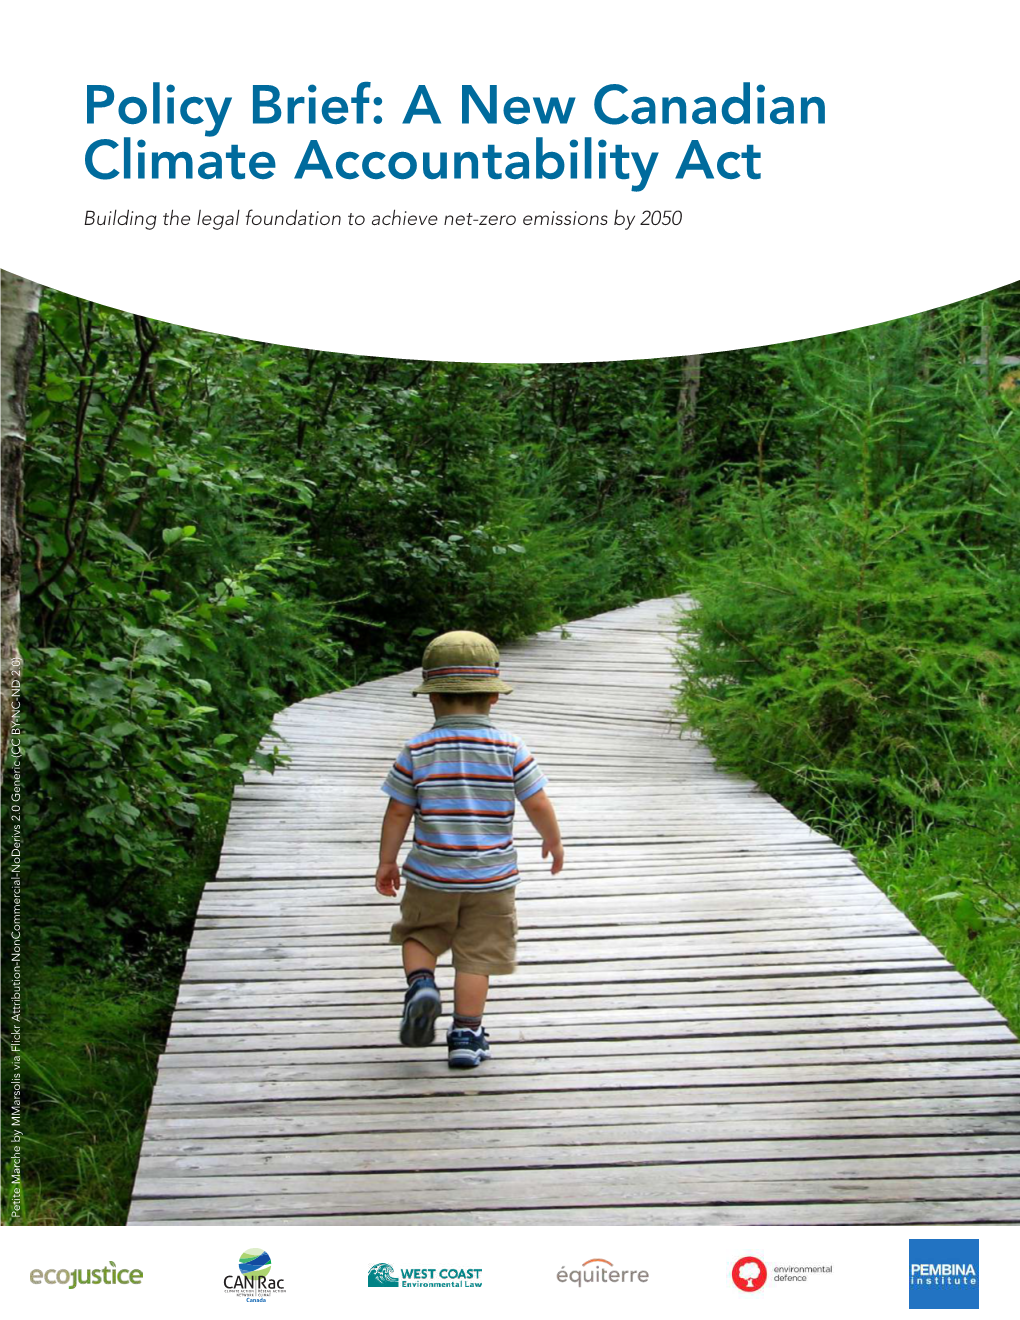 Policy Brief: a New Canadian Climate Accountability